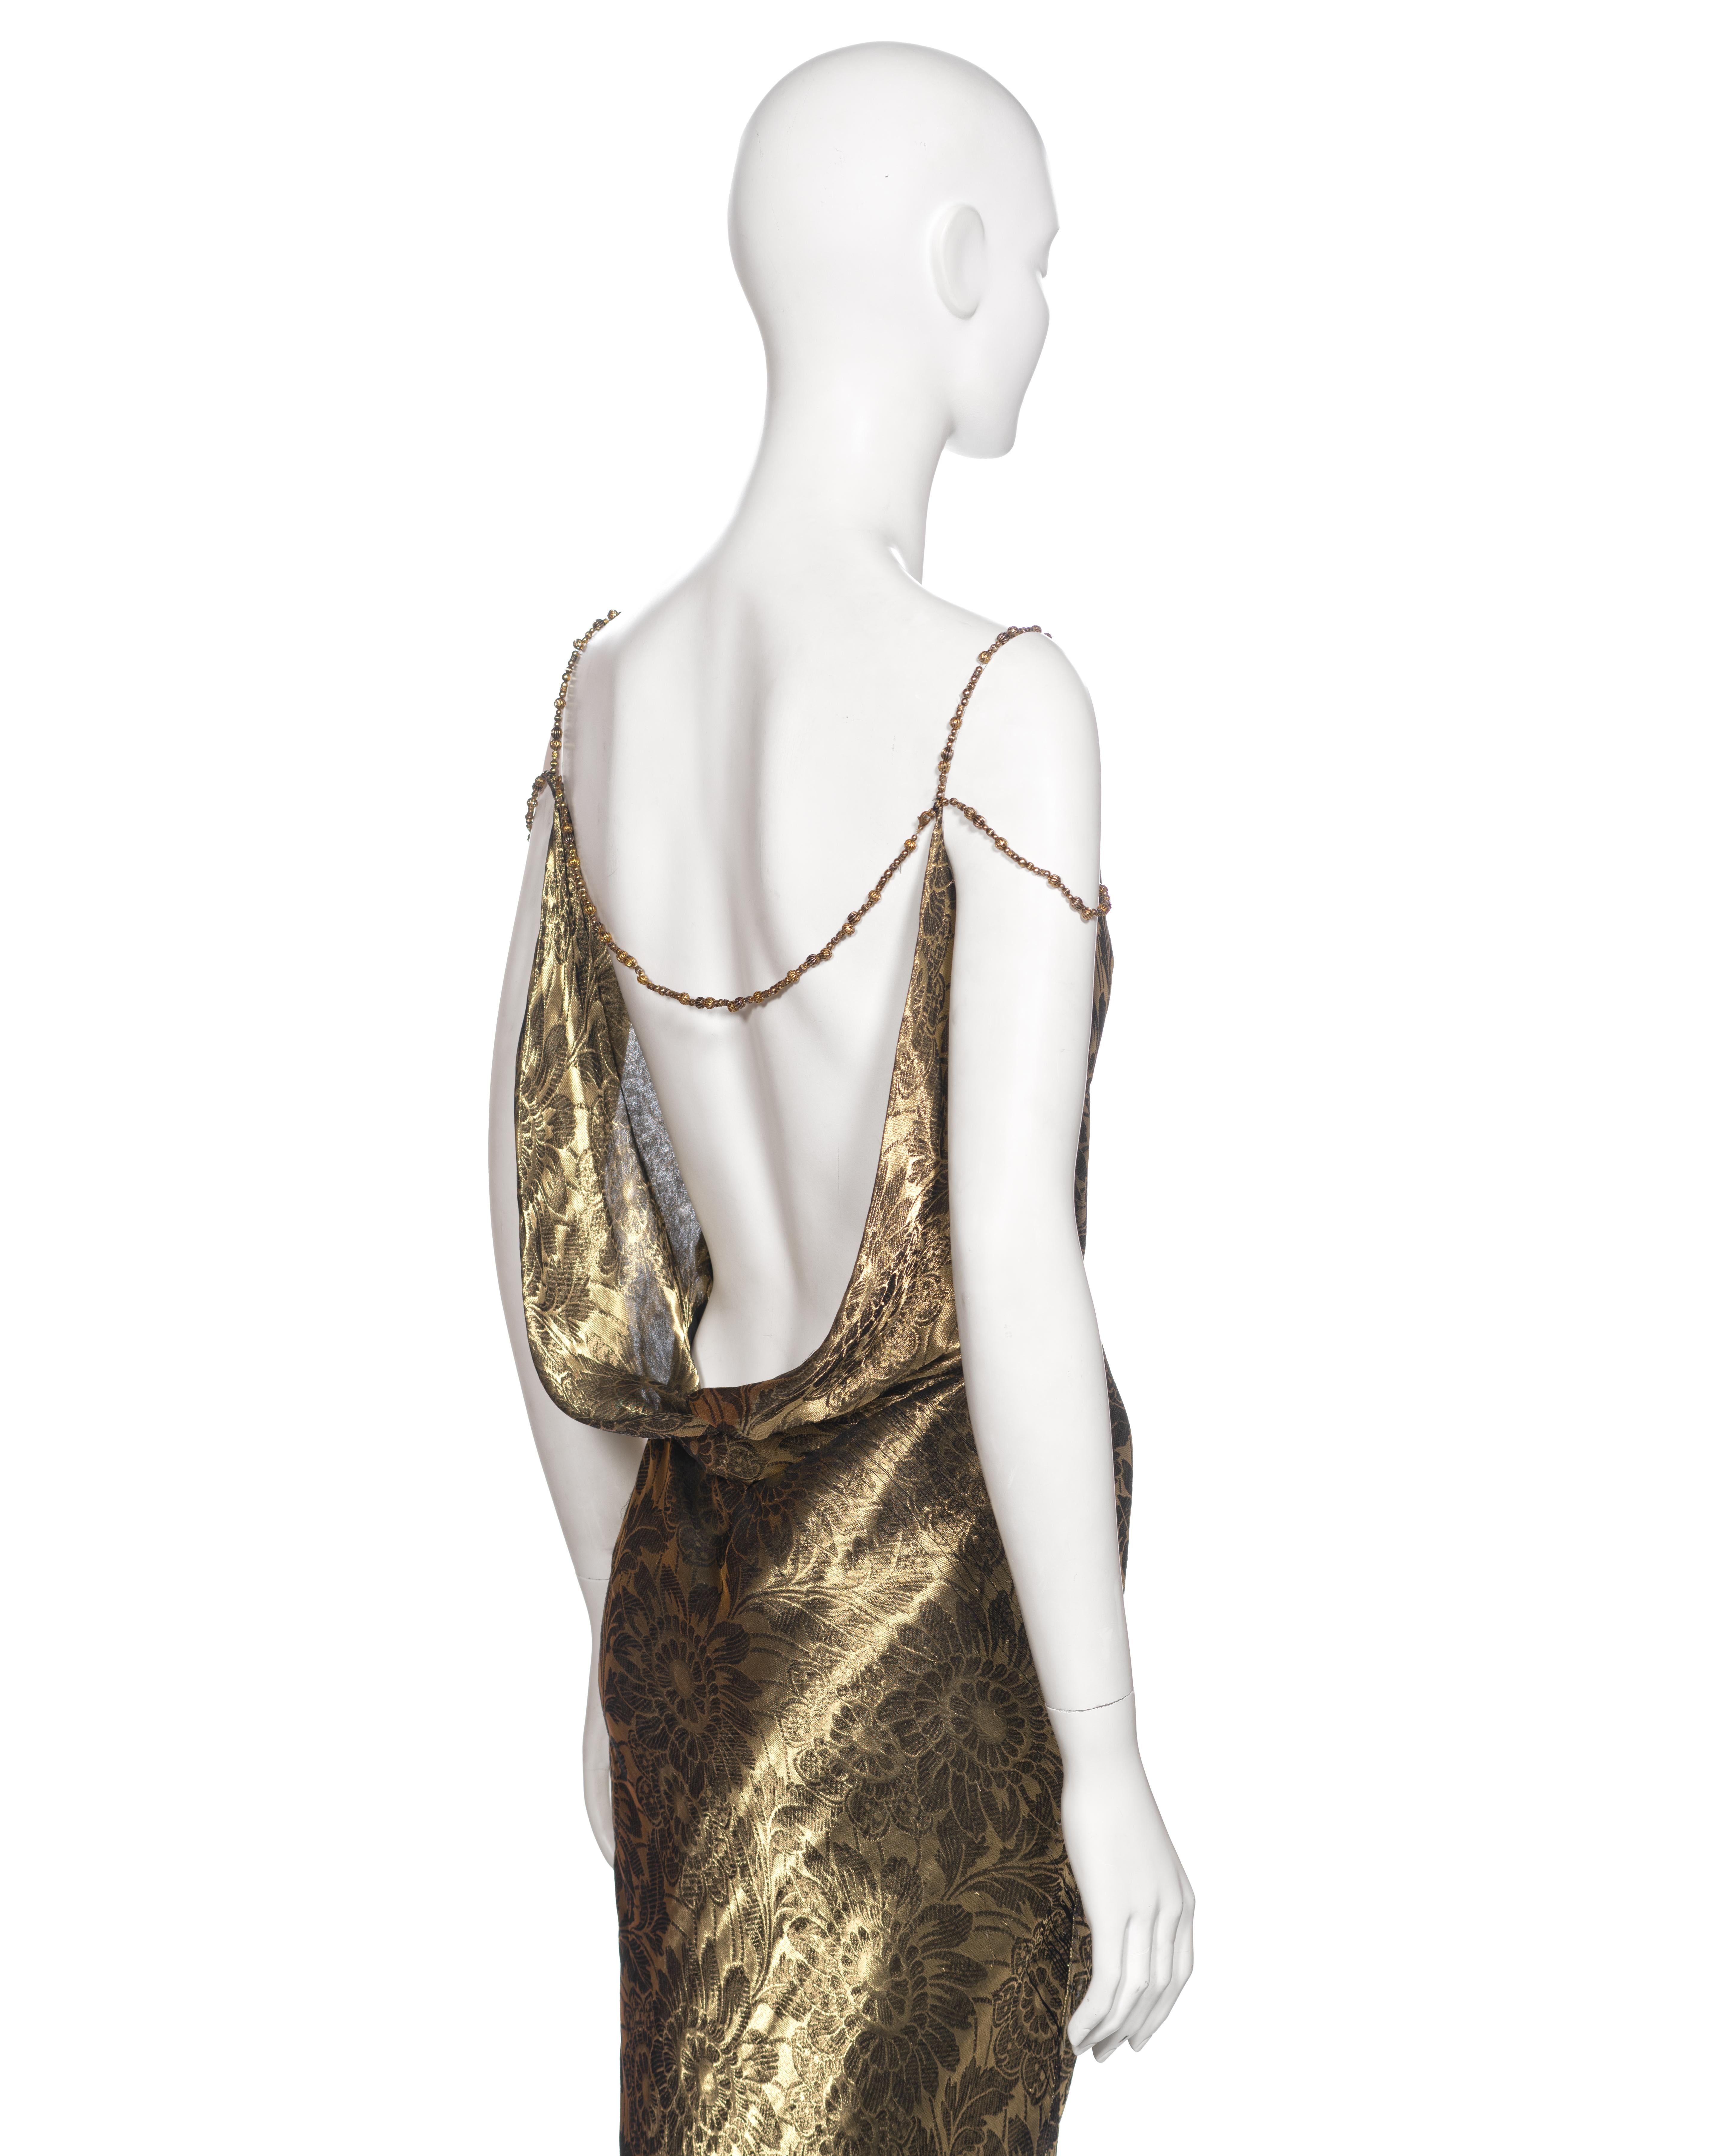 Christian Dior by John Galliano Metallic Antique Gold Evening Dress, FW 1998 For Sale 6